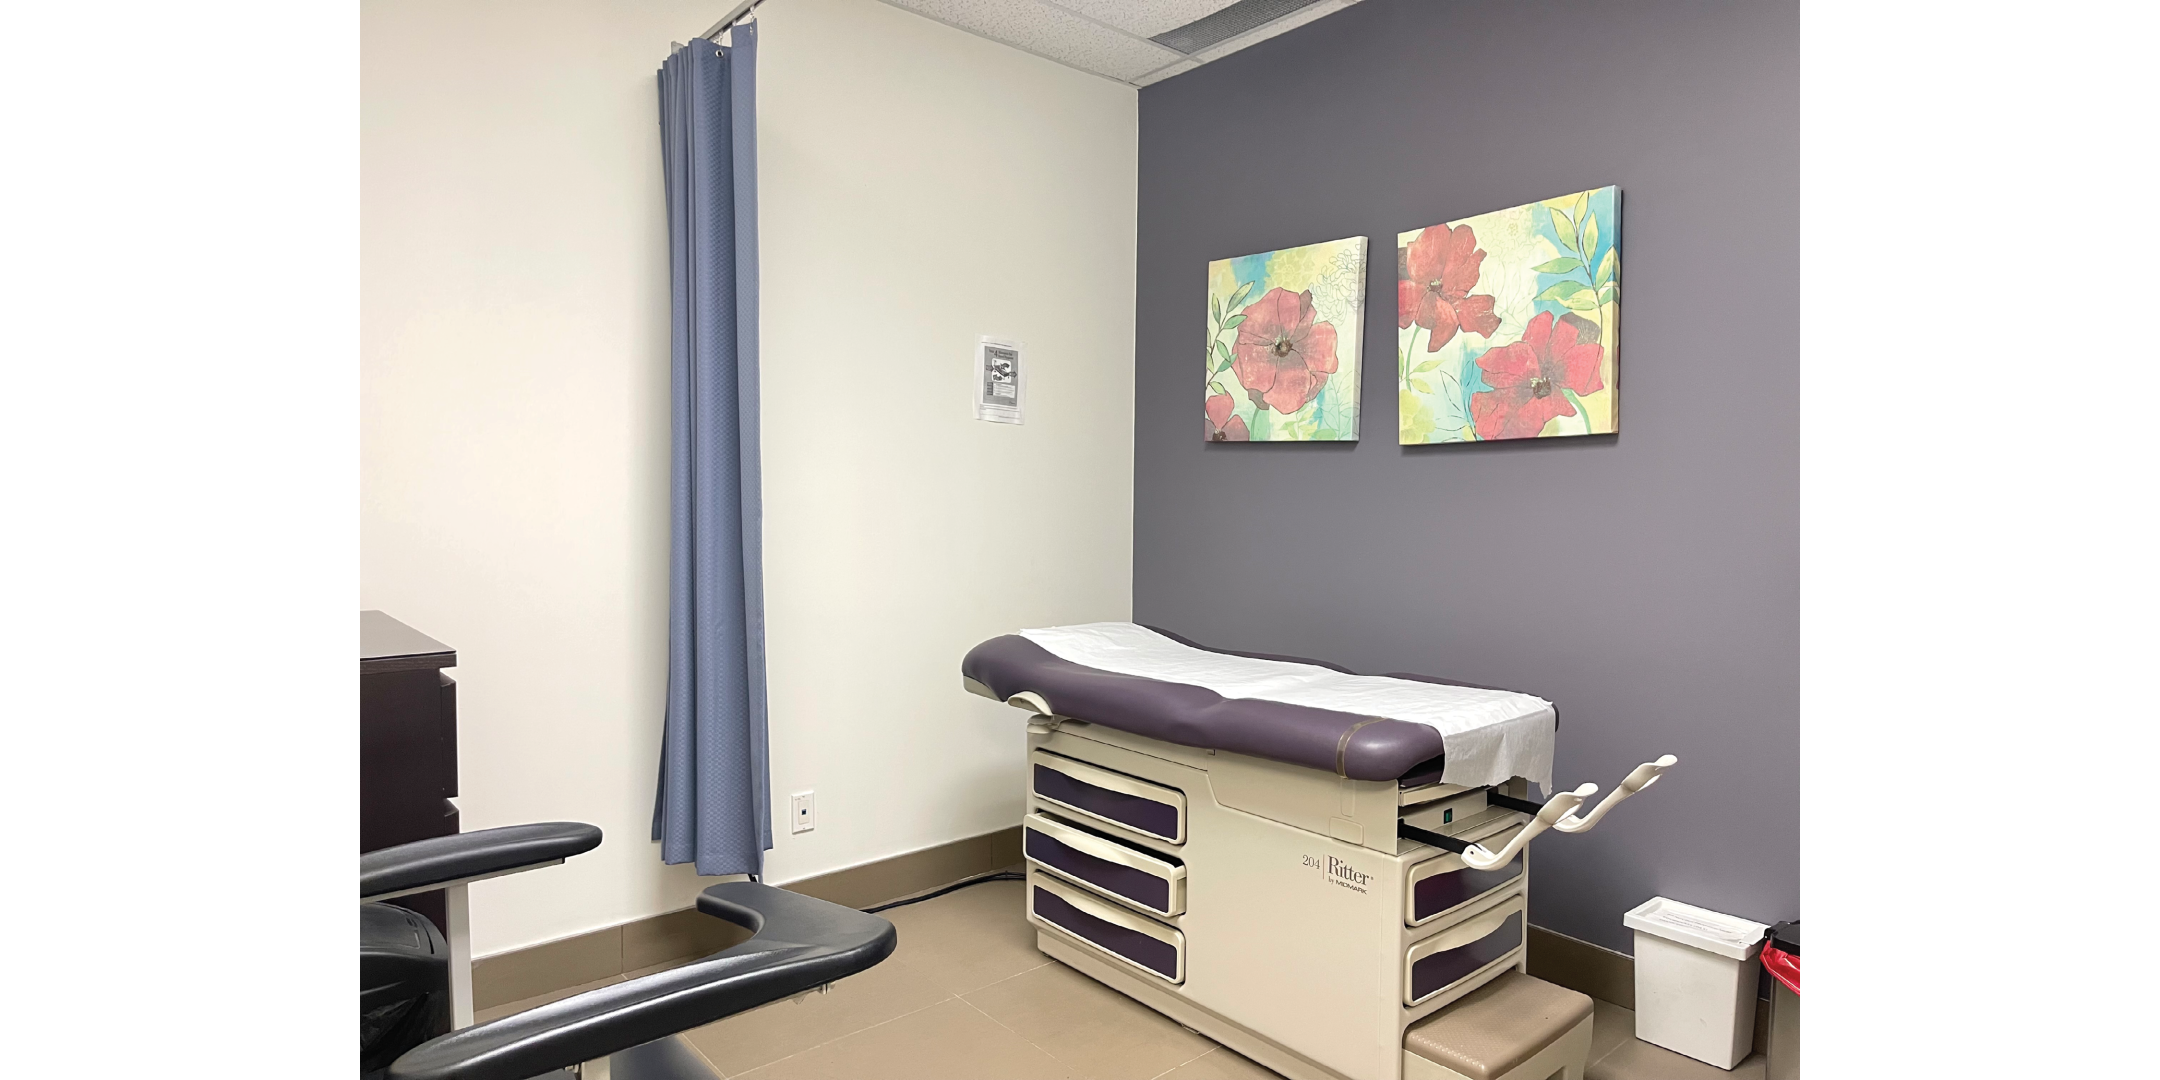 670 Highway 7 Interior Patient Room with hospital bed